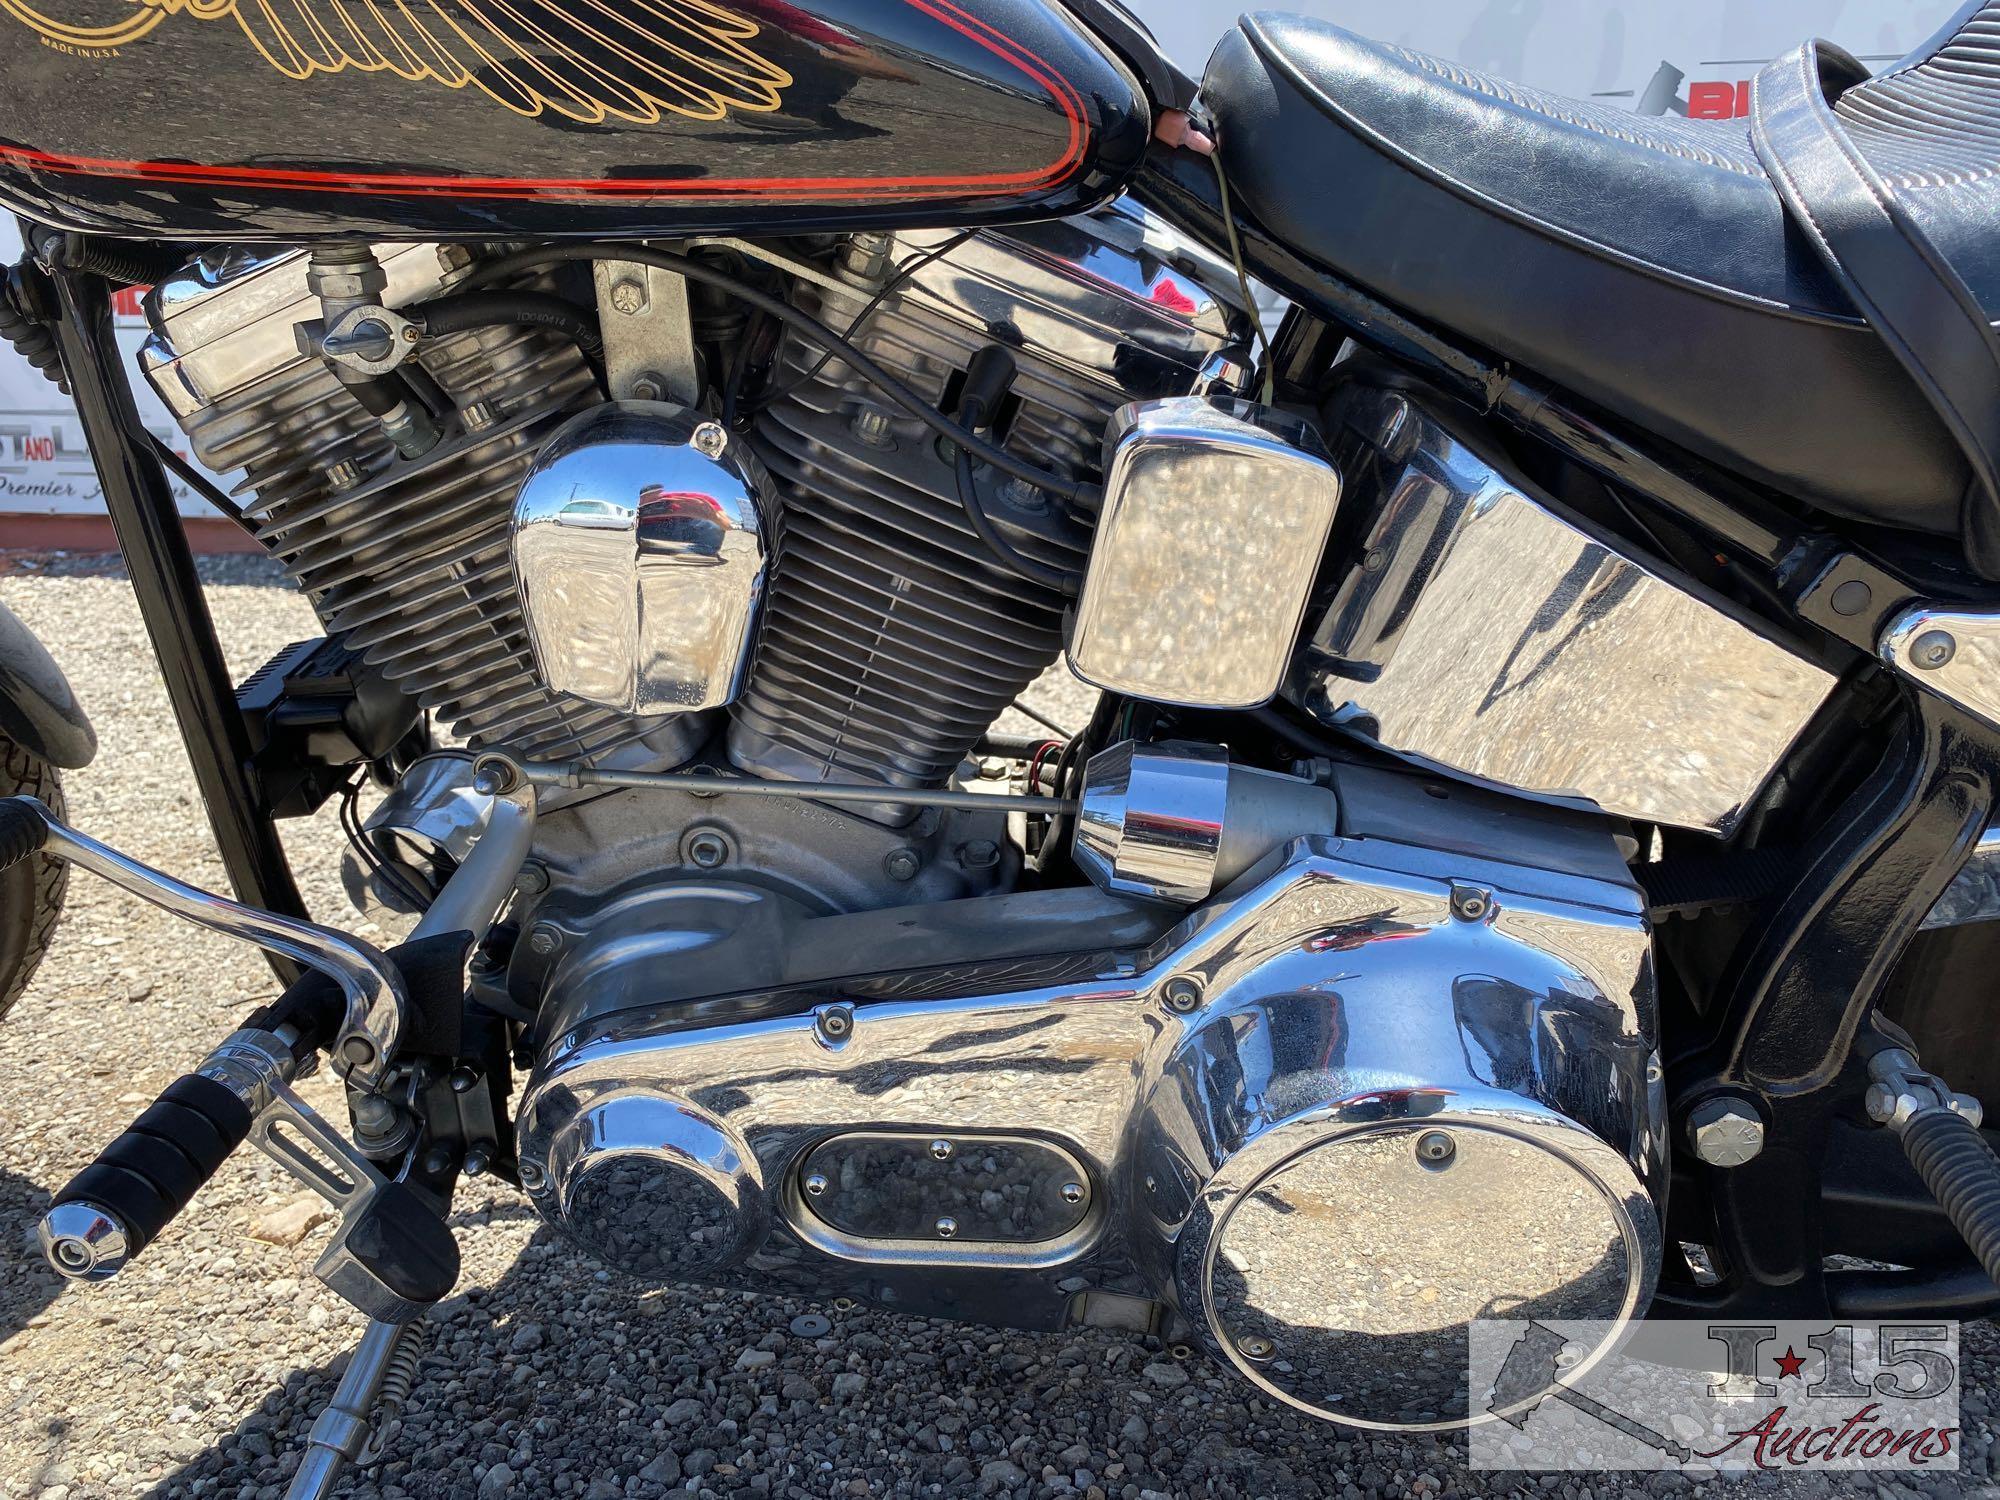 1986 Harley Davidson (TURNS OVER BUT DOES NOT START)